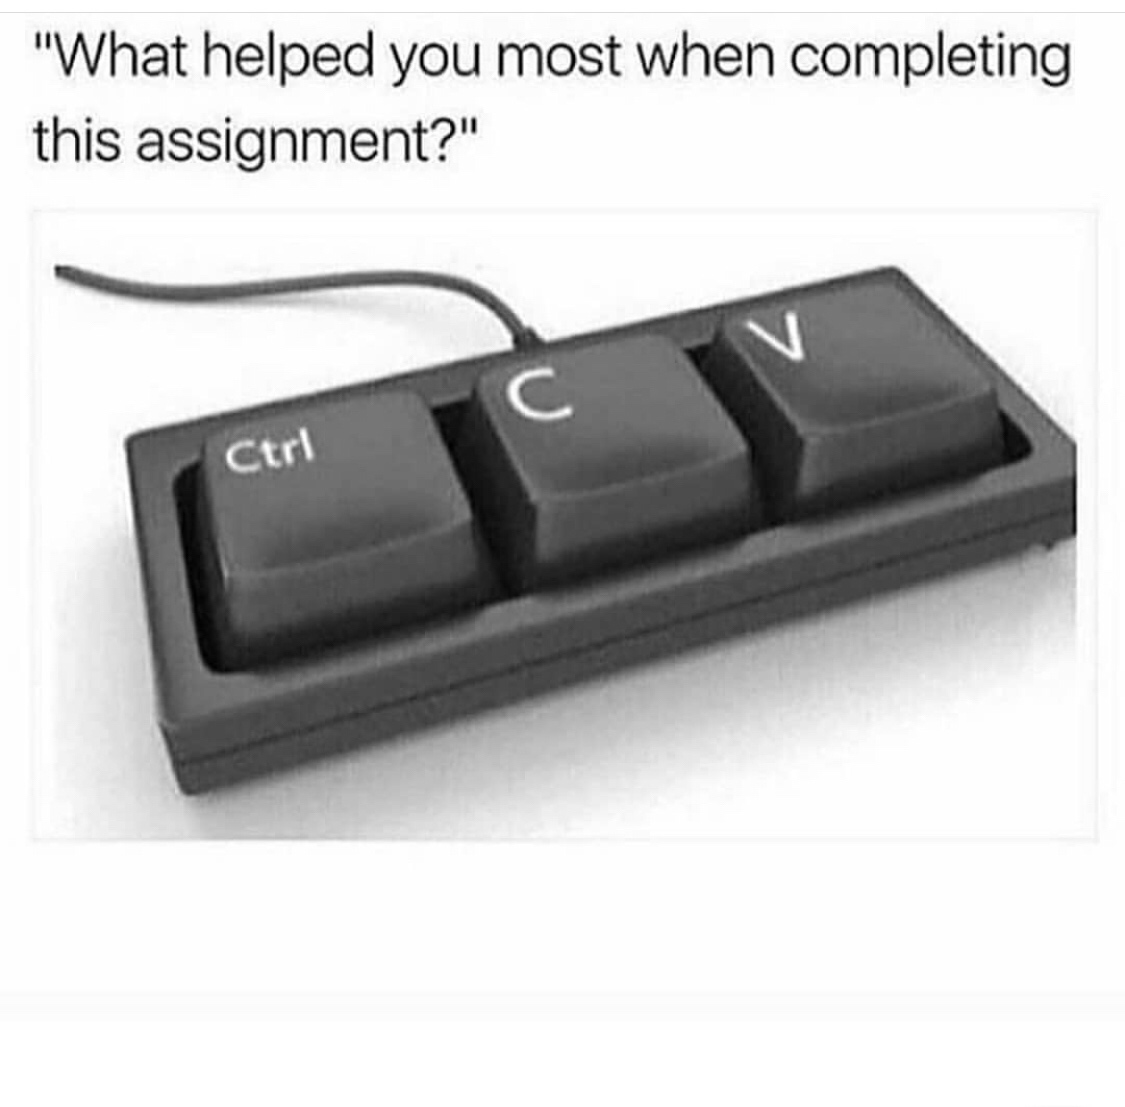 ctrl cv meme - "What helped you most when completing this assignment?" Ctrl